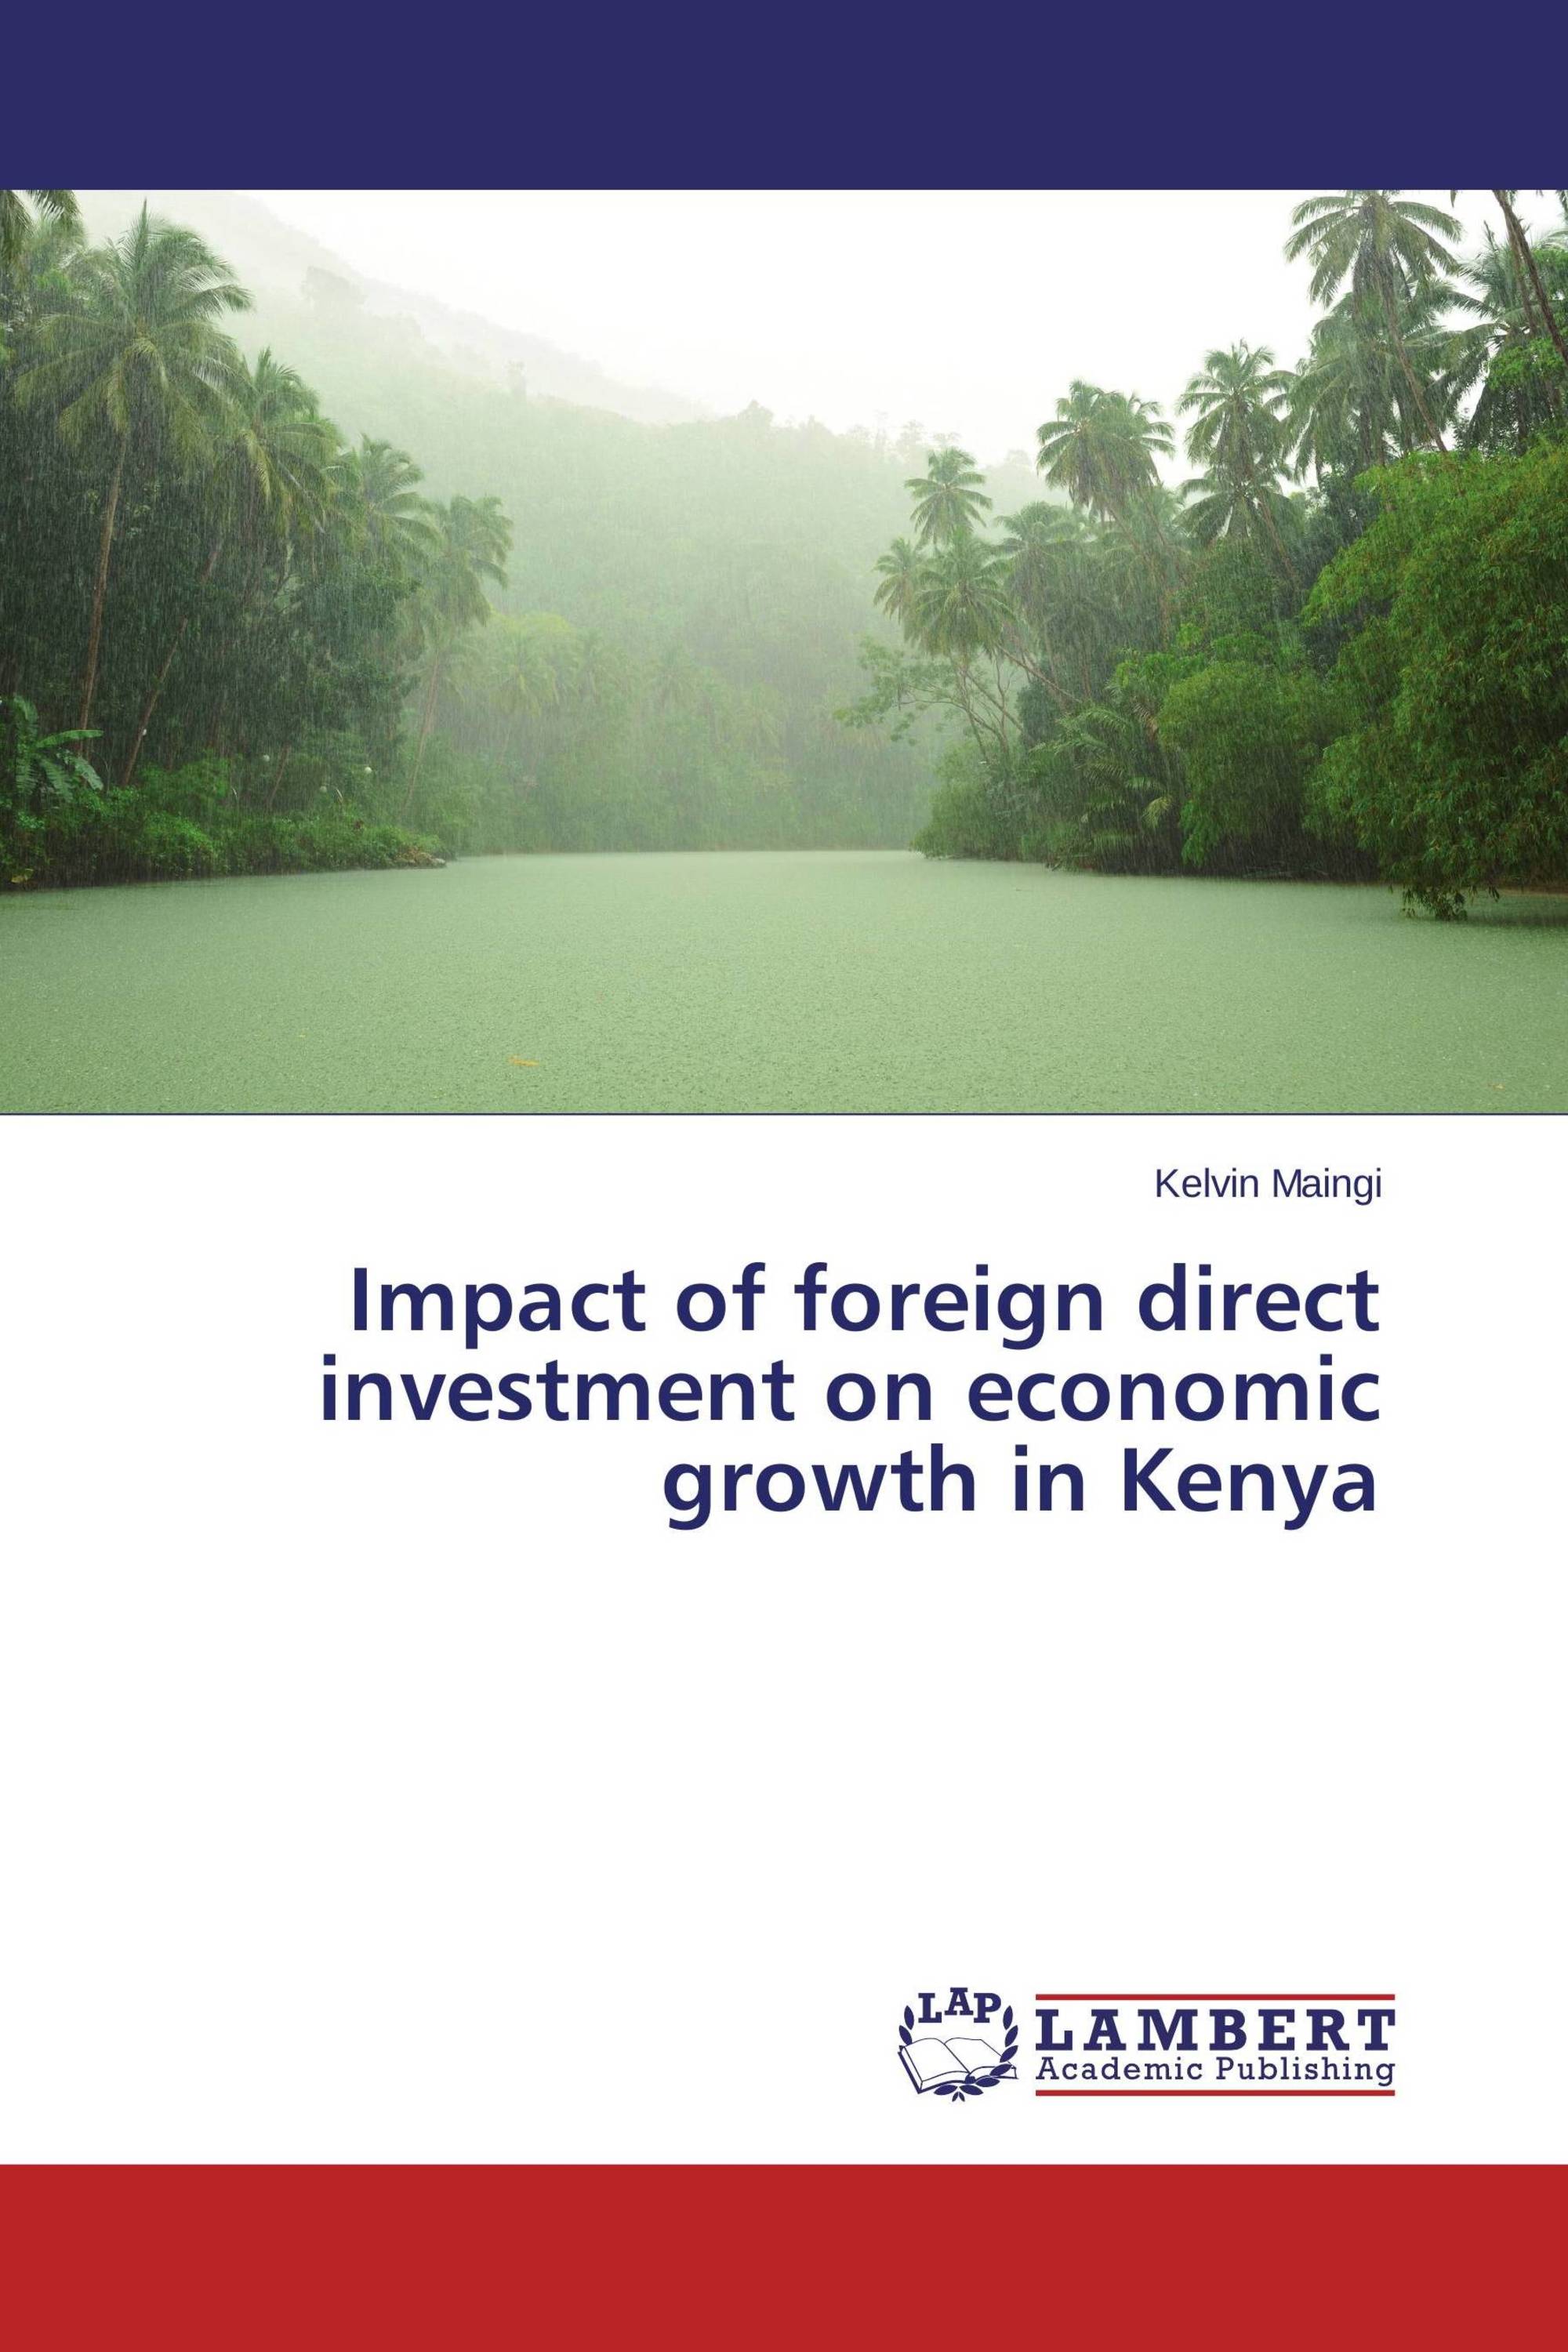 Economic Analysis of Foreign Direct Investment and